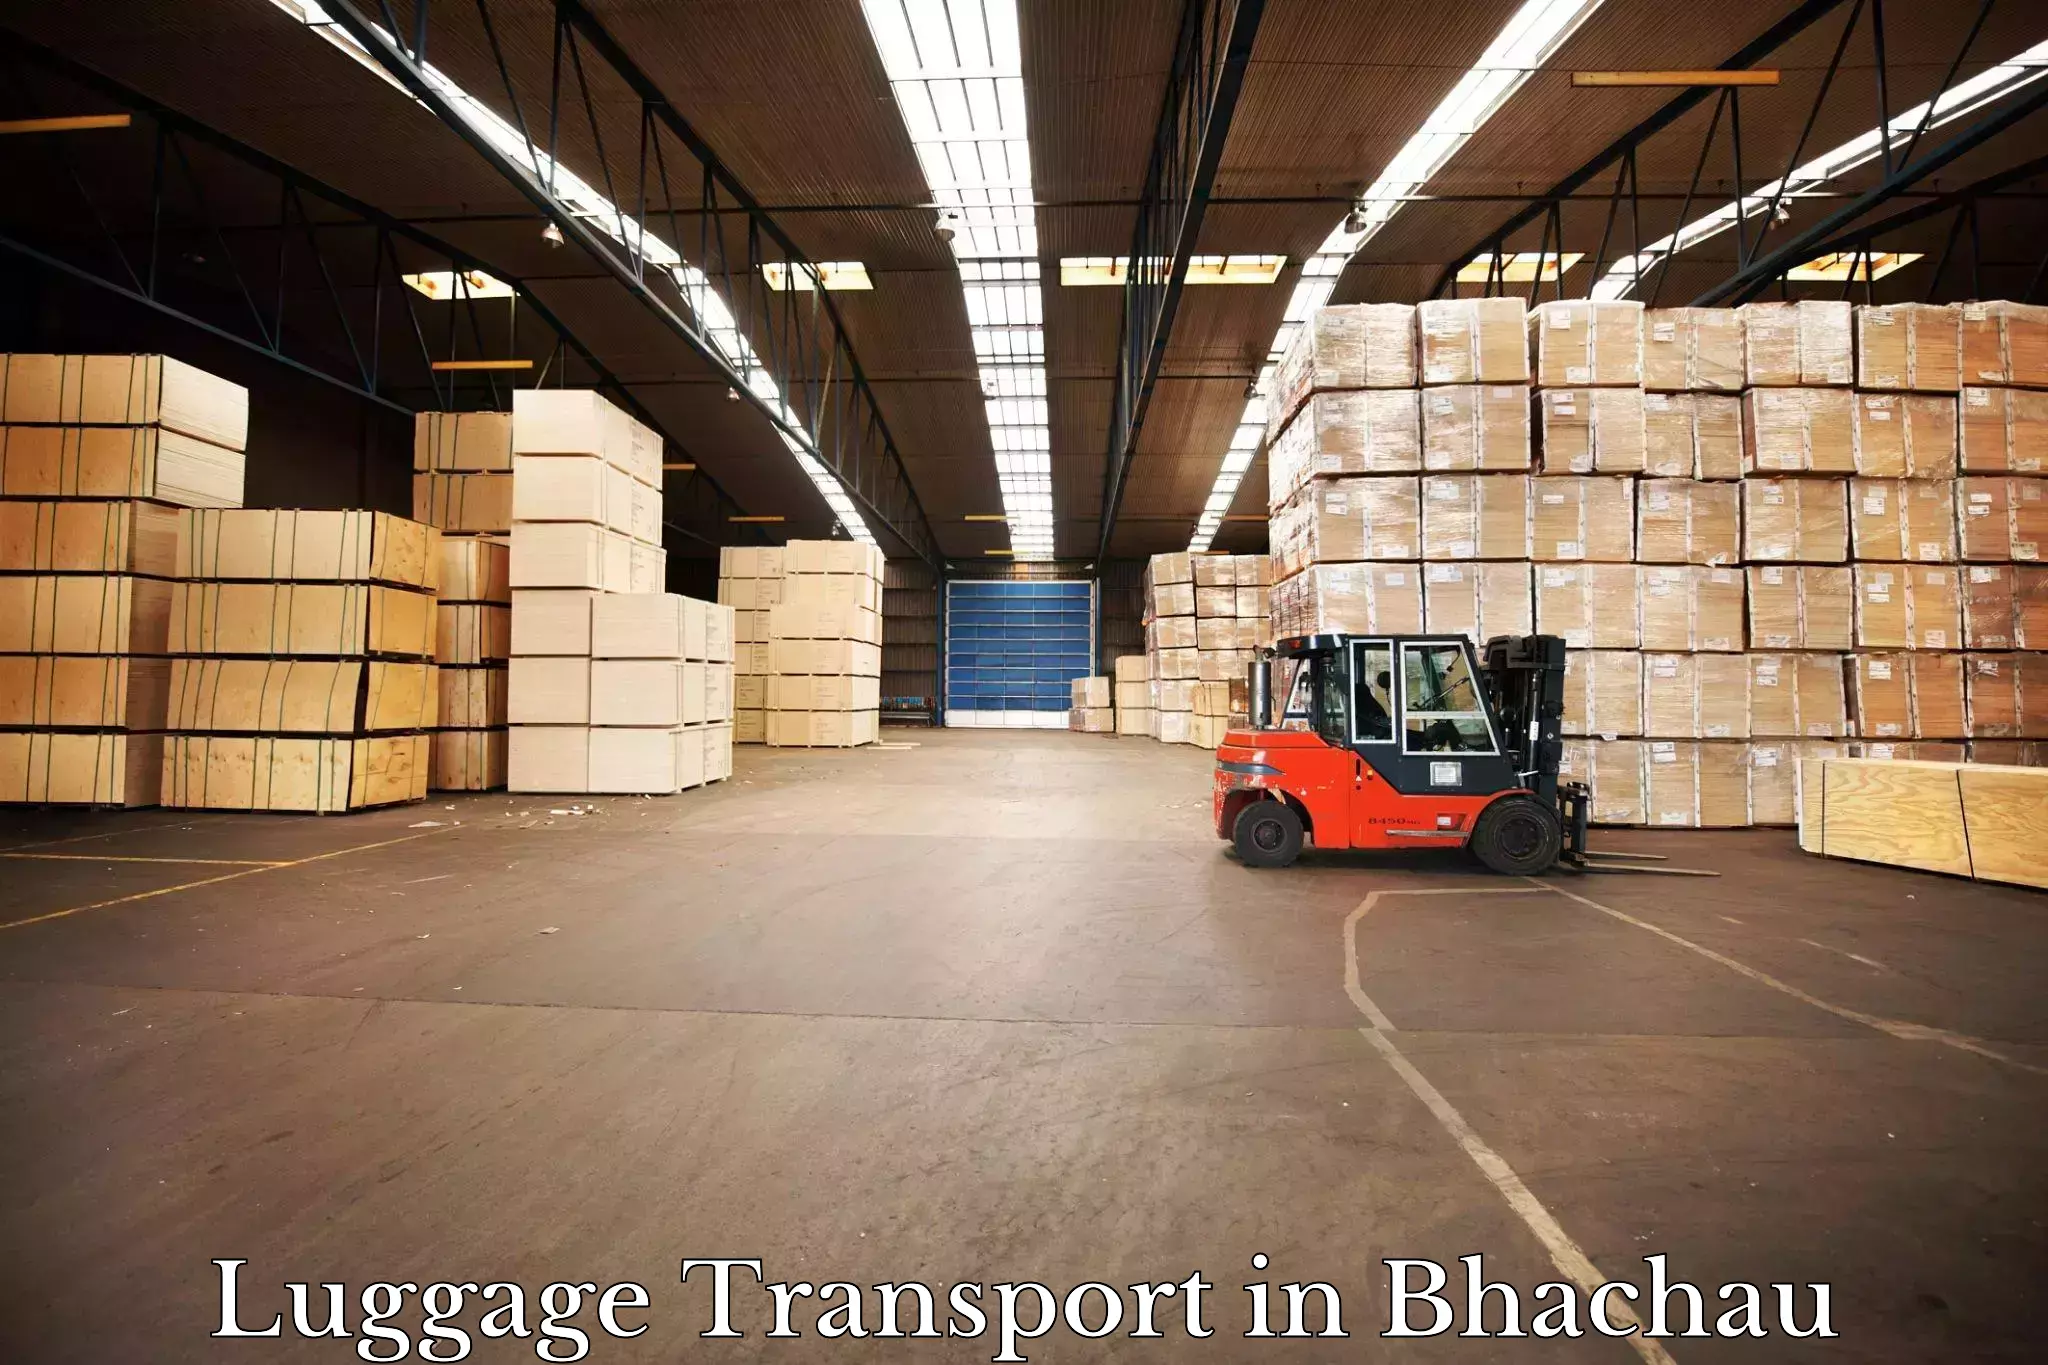 Luggage transport guidelines in Bhachau